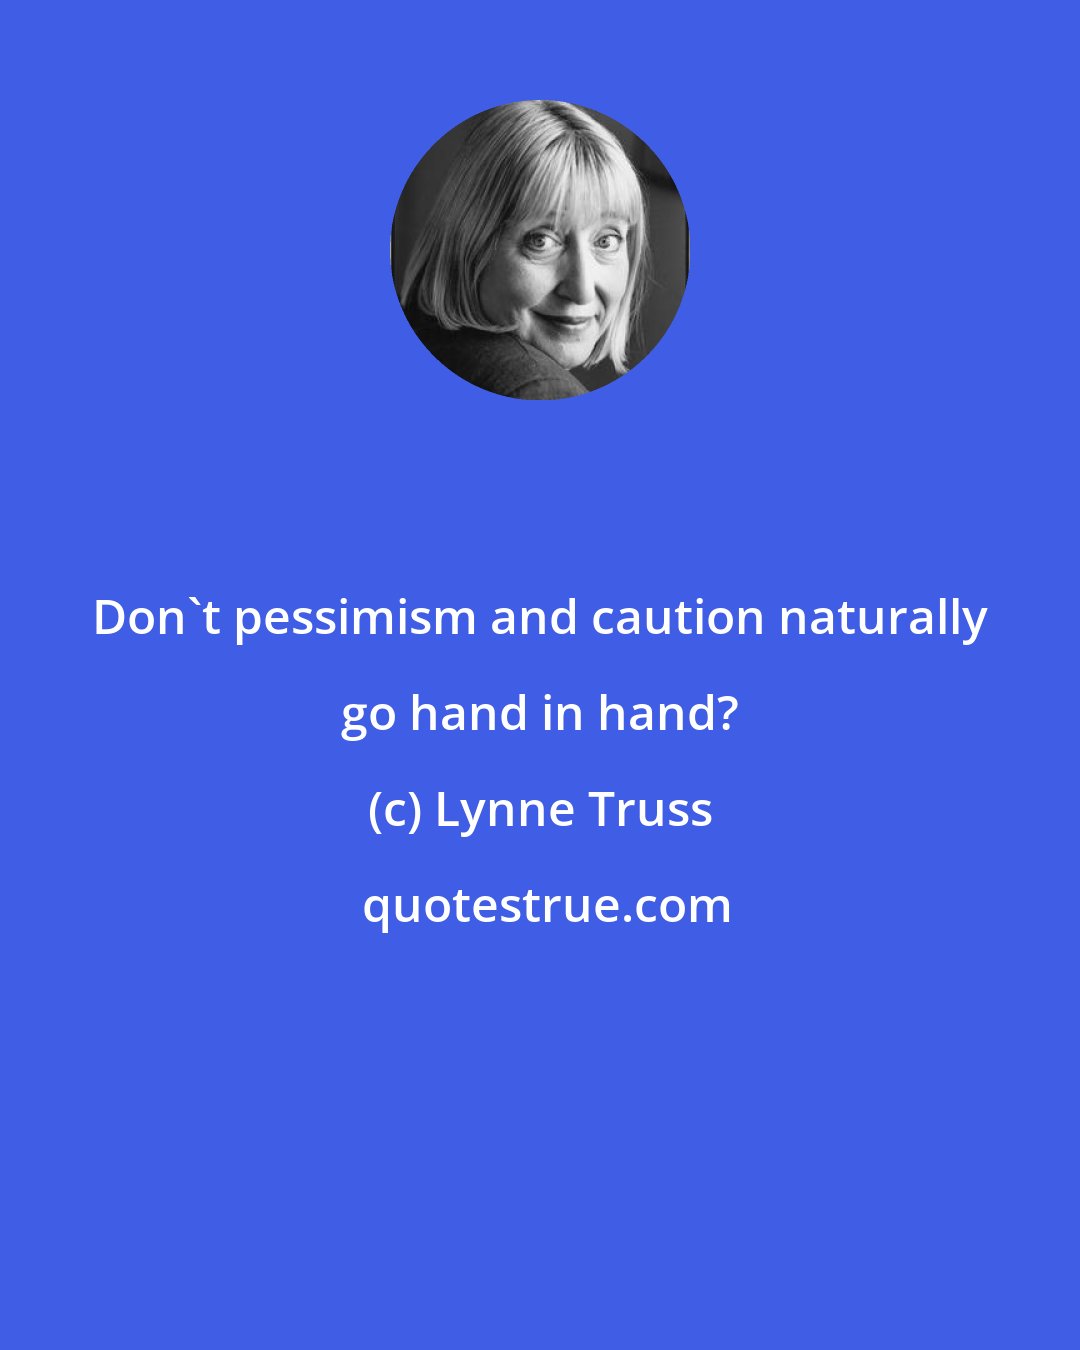 Lynne Truss: Don't pessimism and caution naturally go hand in hand?